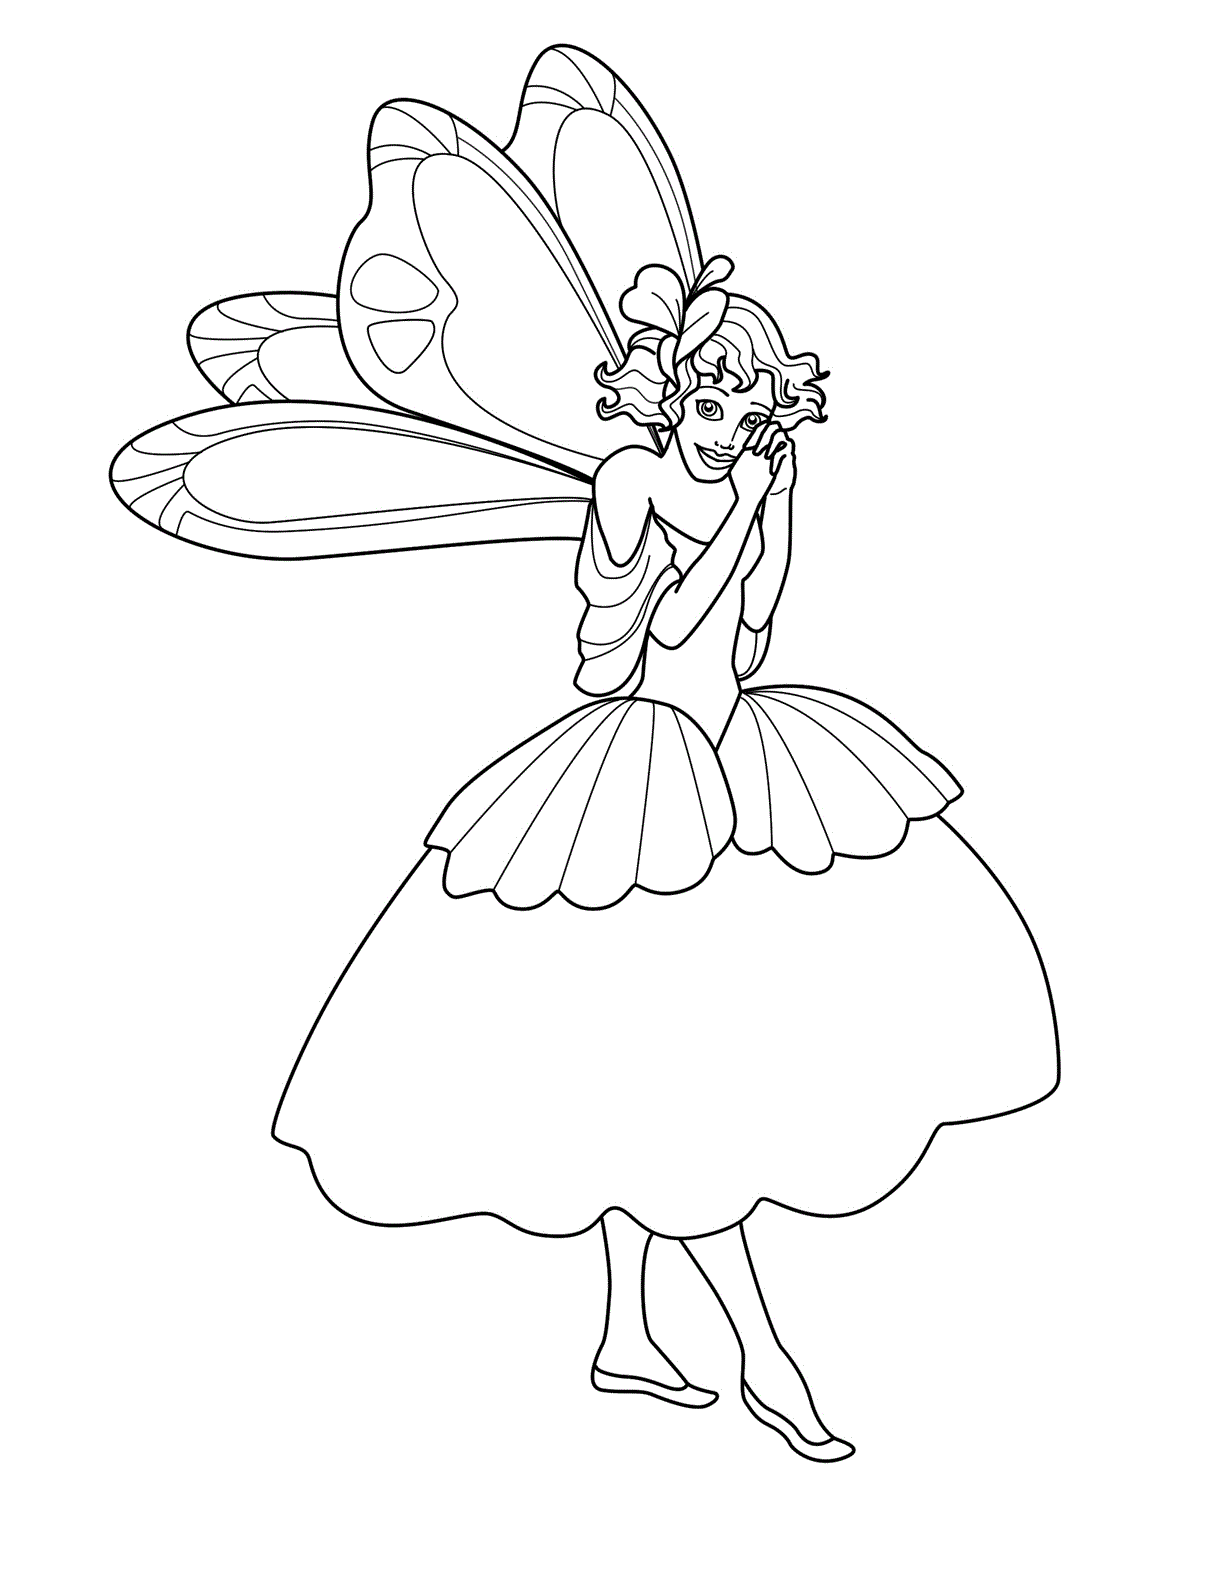 Free Childrens Colouring Pages To Print Printable Fairy Coloring For Kids coloring page